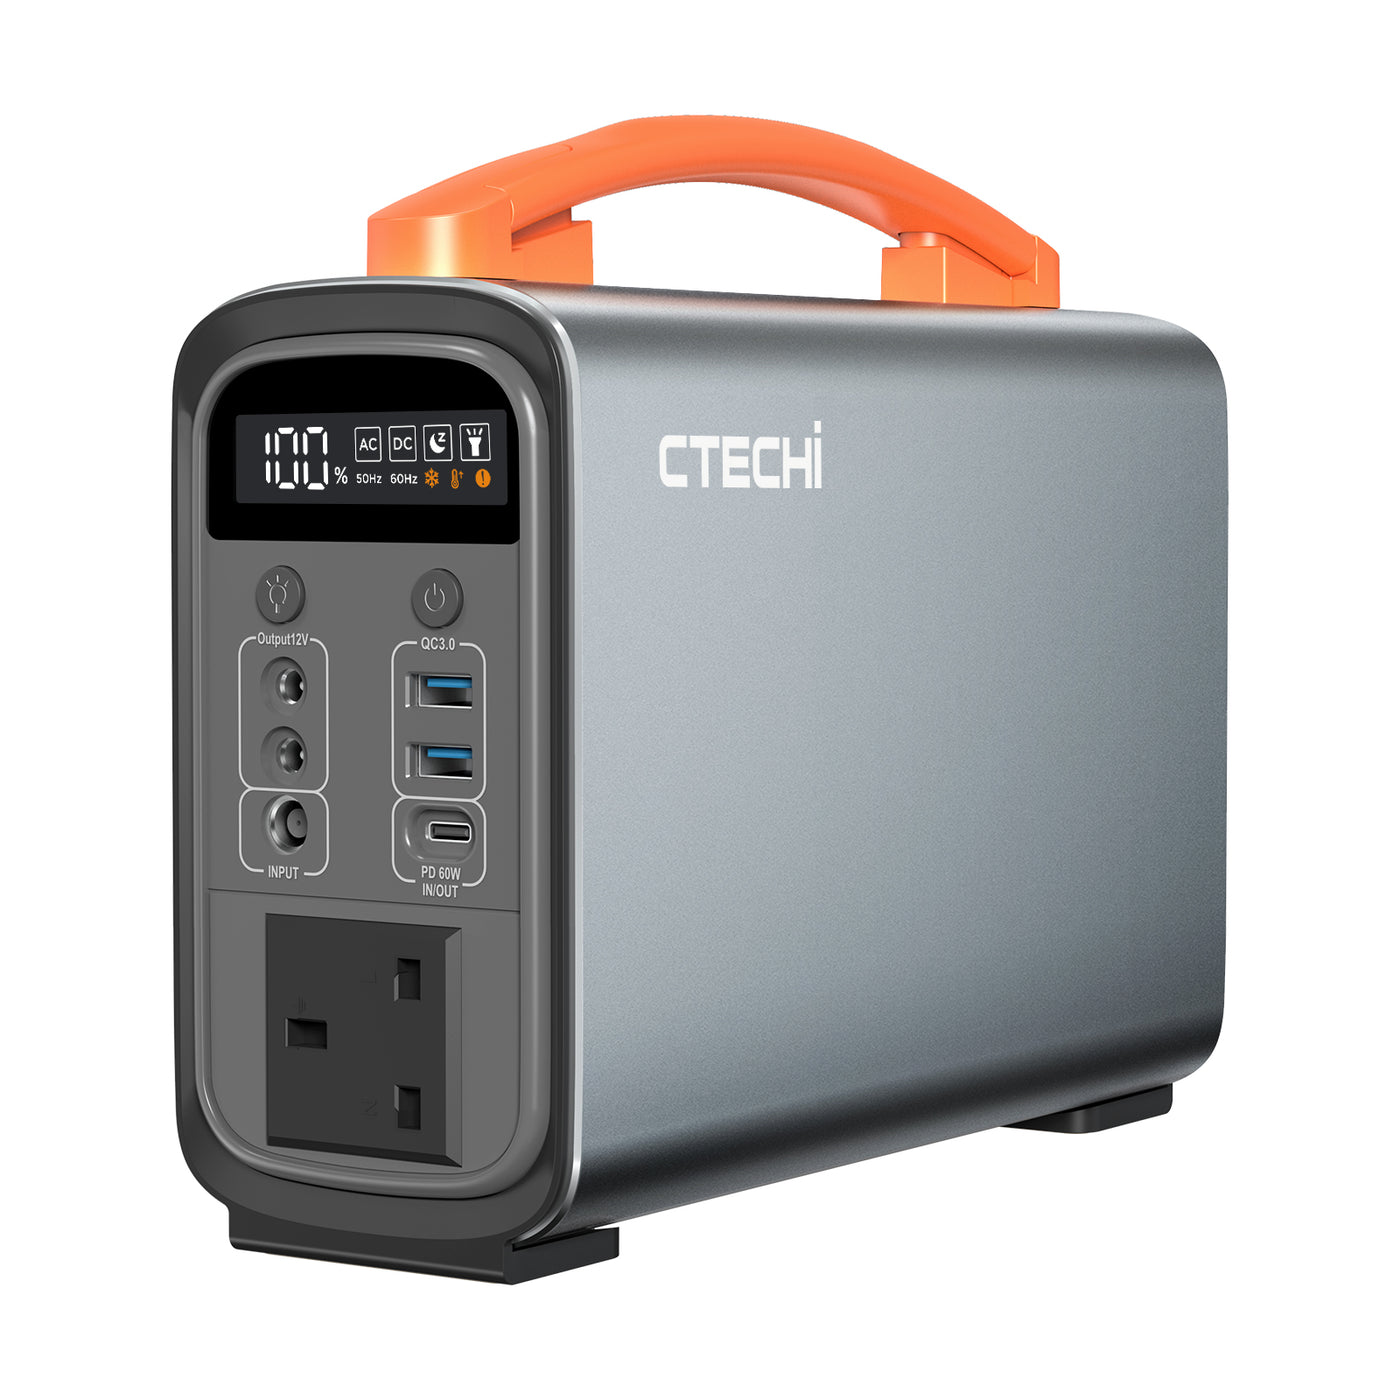 Power Station, Ctechi- Battery Generator- 300W Peak Output, 240Wh- Portable  200W, Push Button Start, Gas Free, Indoor-Outdoor, 10 lbs- LiFePo4